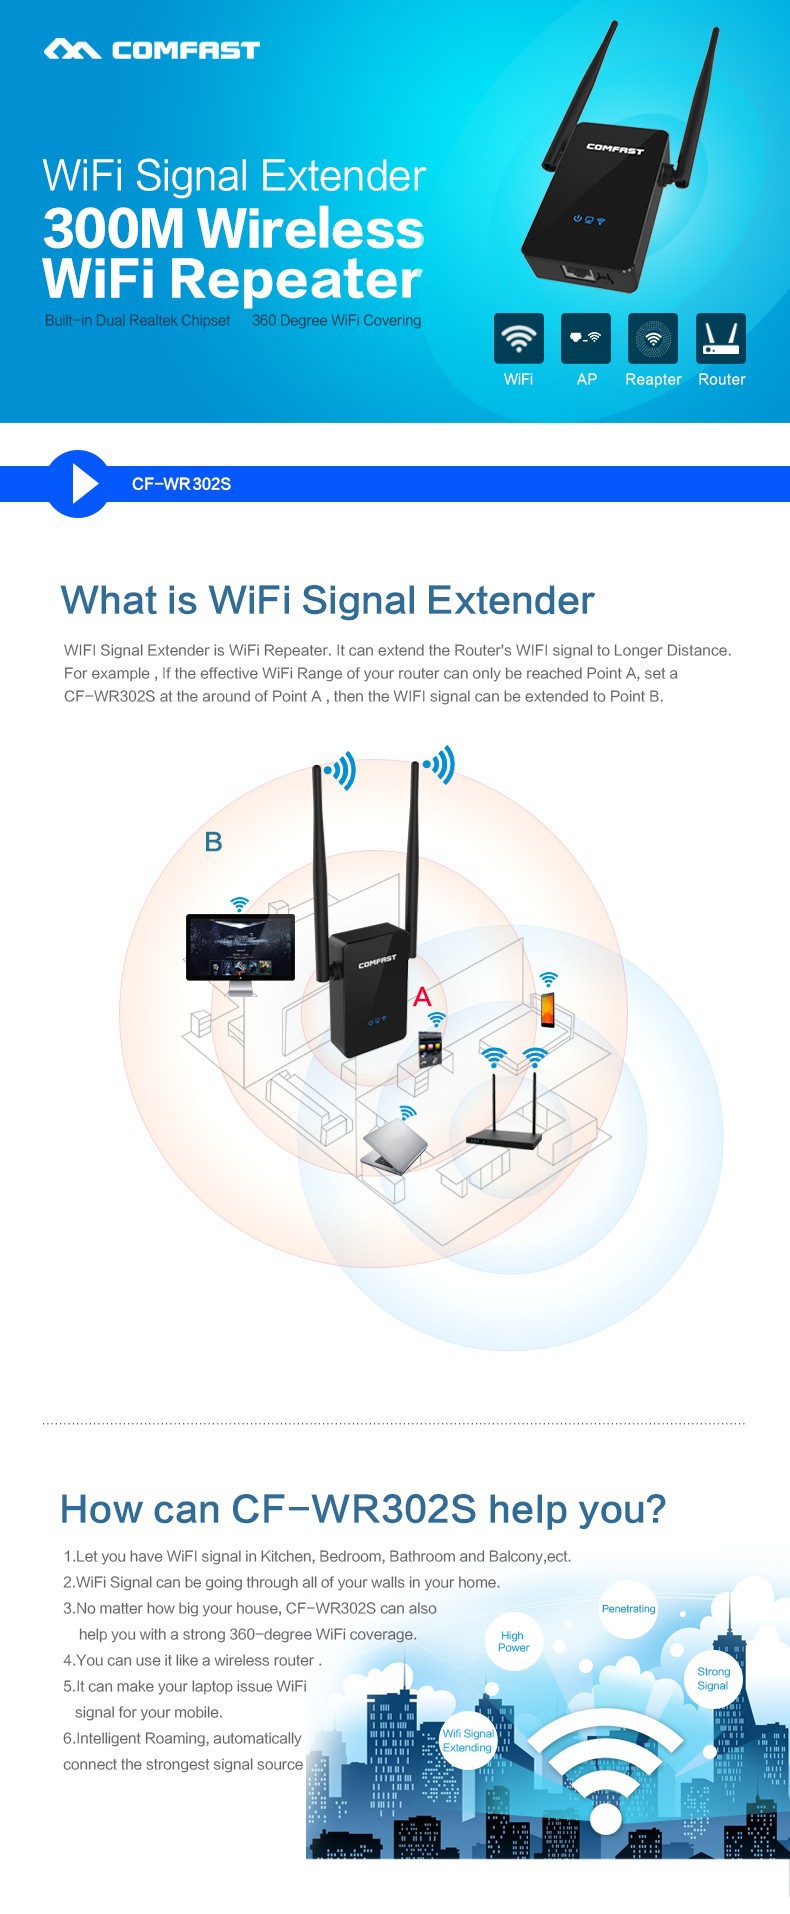 Up to 300Mbps Wifi Repeater dual 5dBi External Antennas 802.11N B G wireless Router Range Expander Signal Boosters